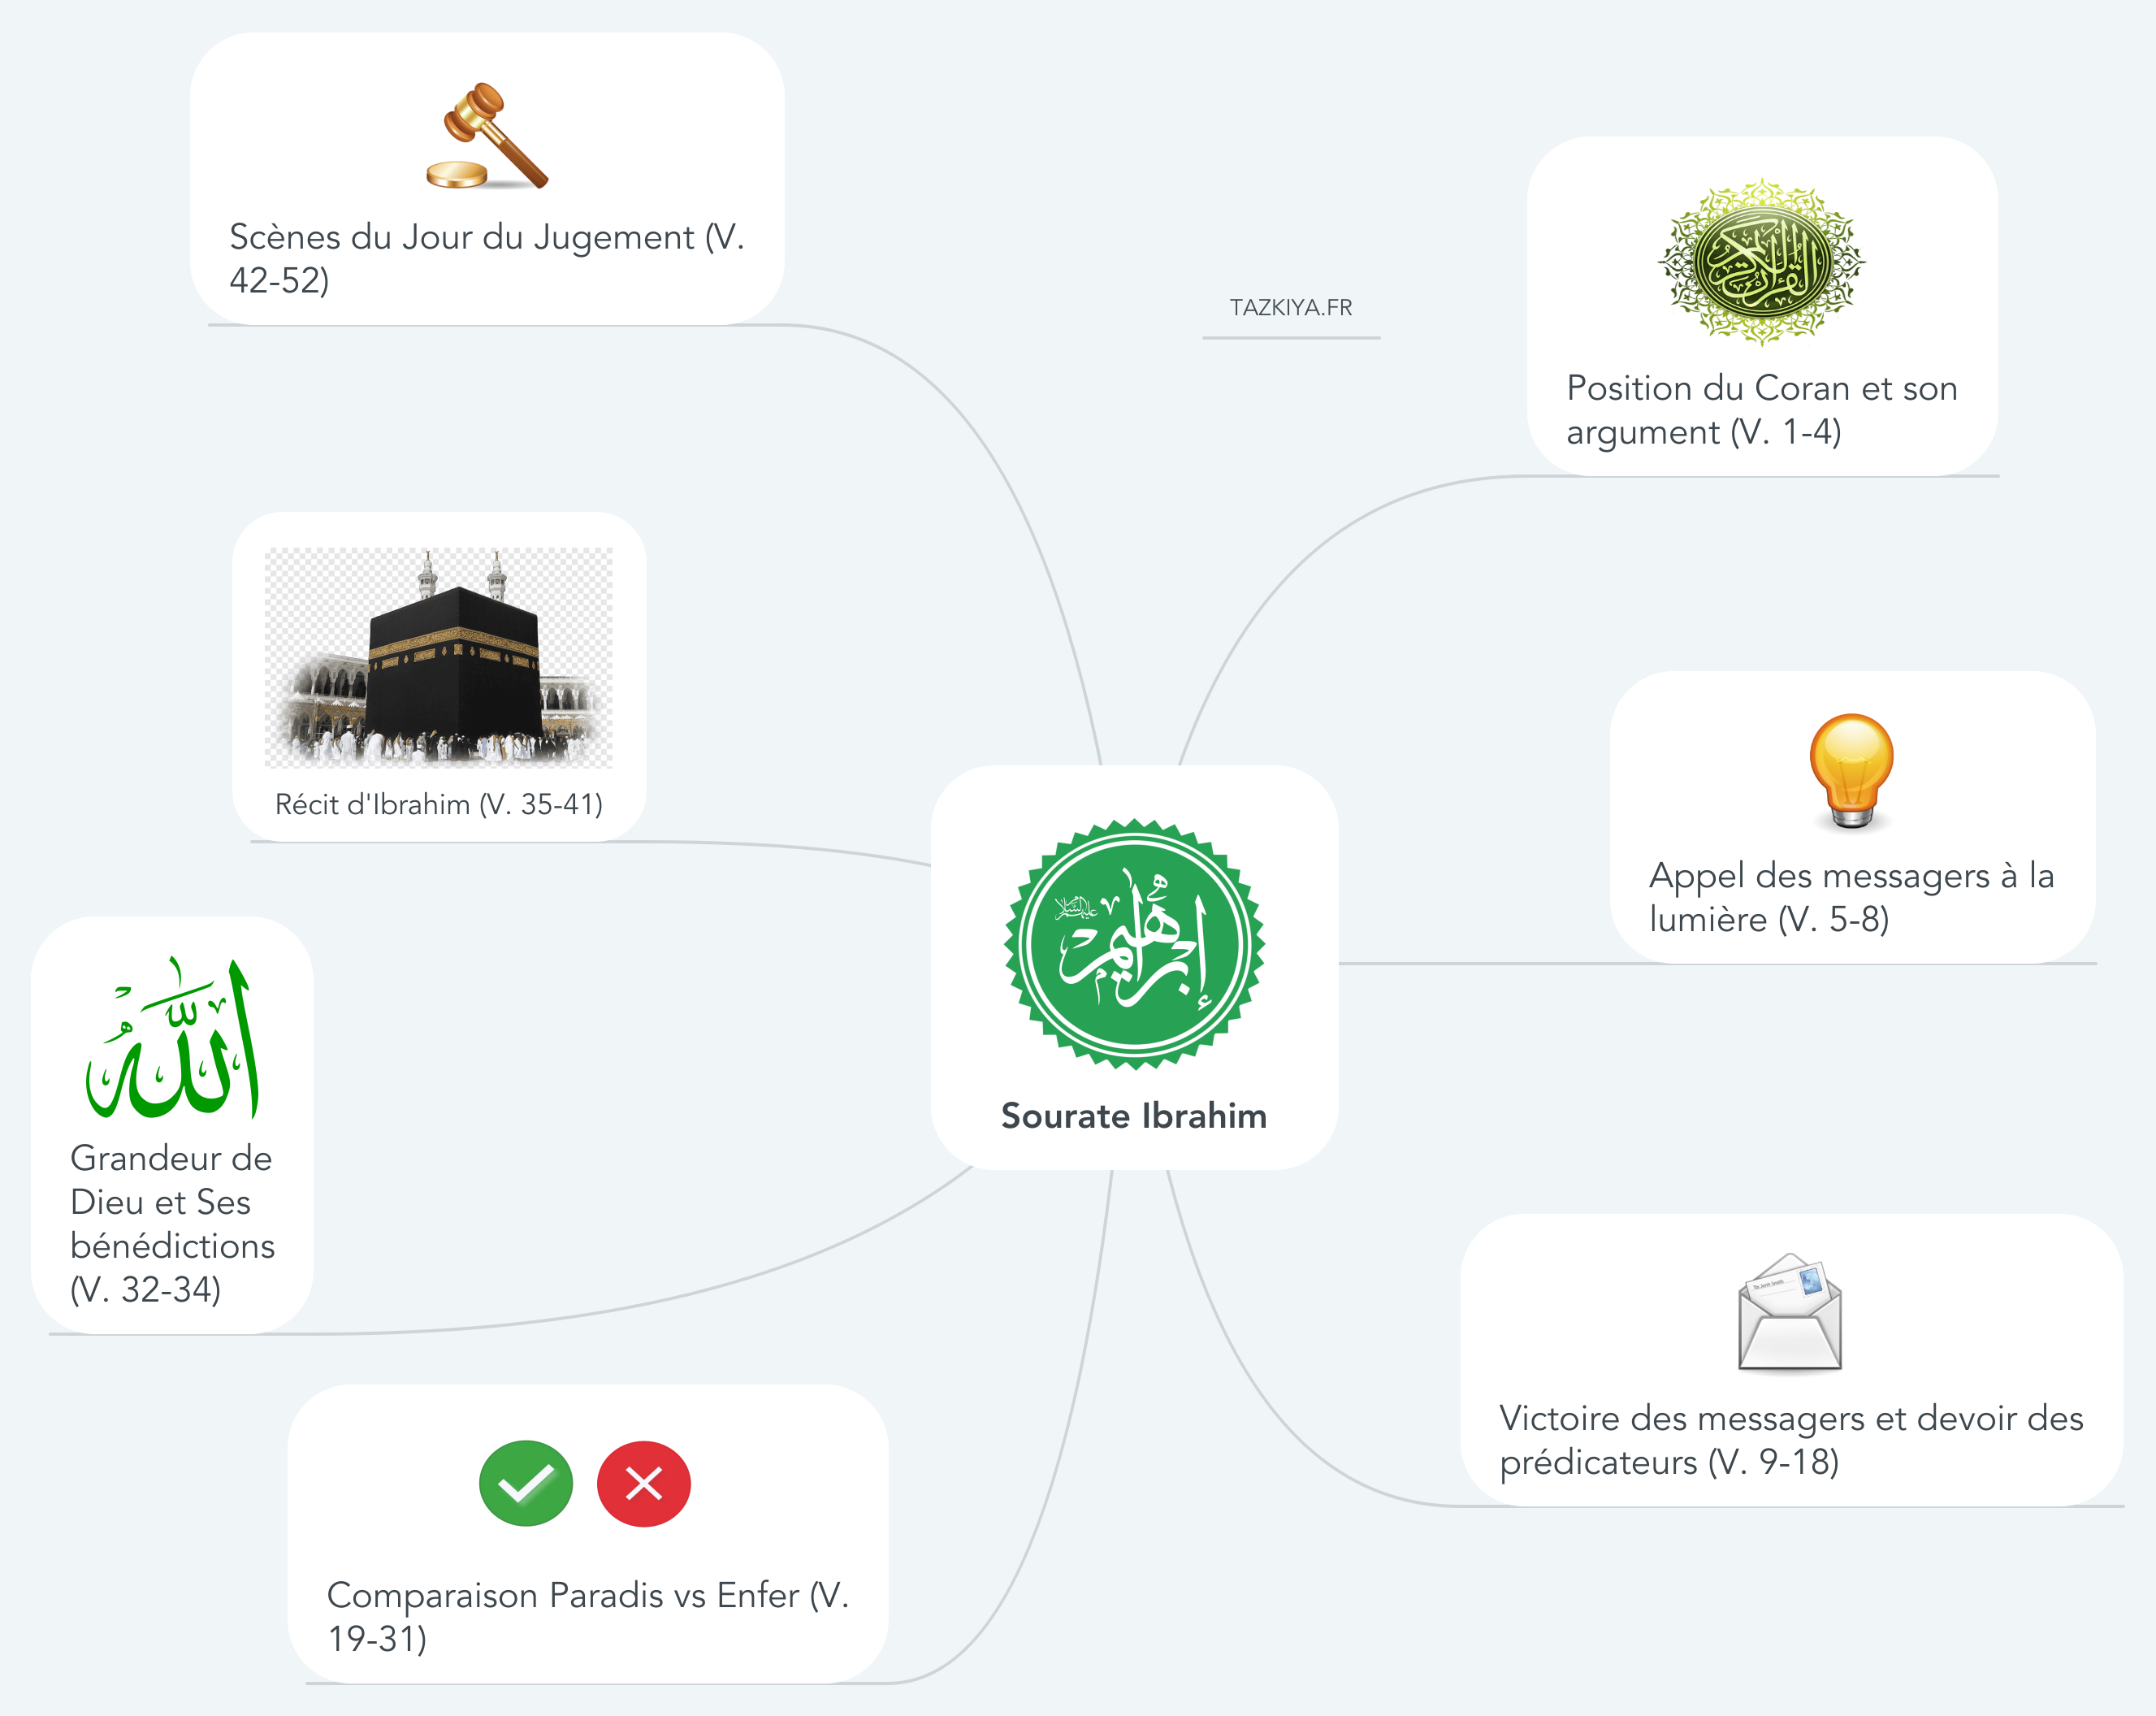 Mind map sourate ibrahim